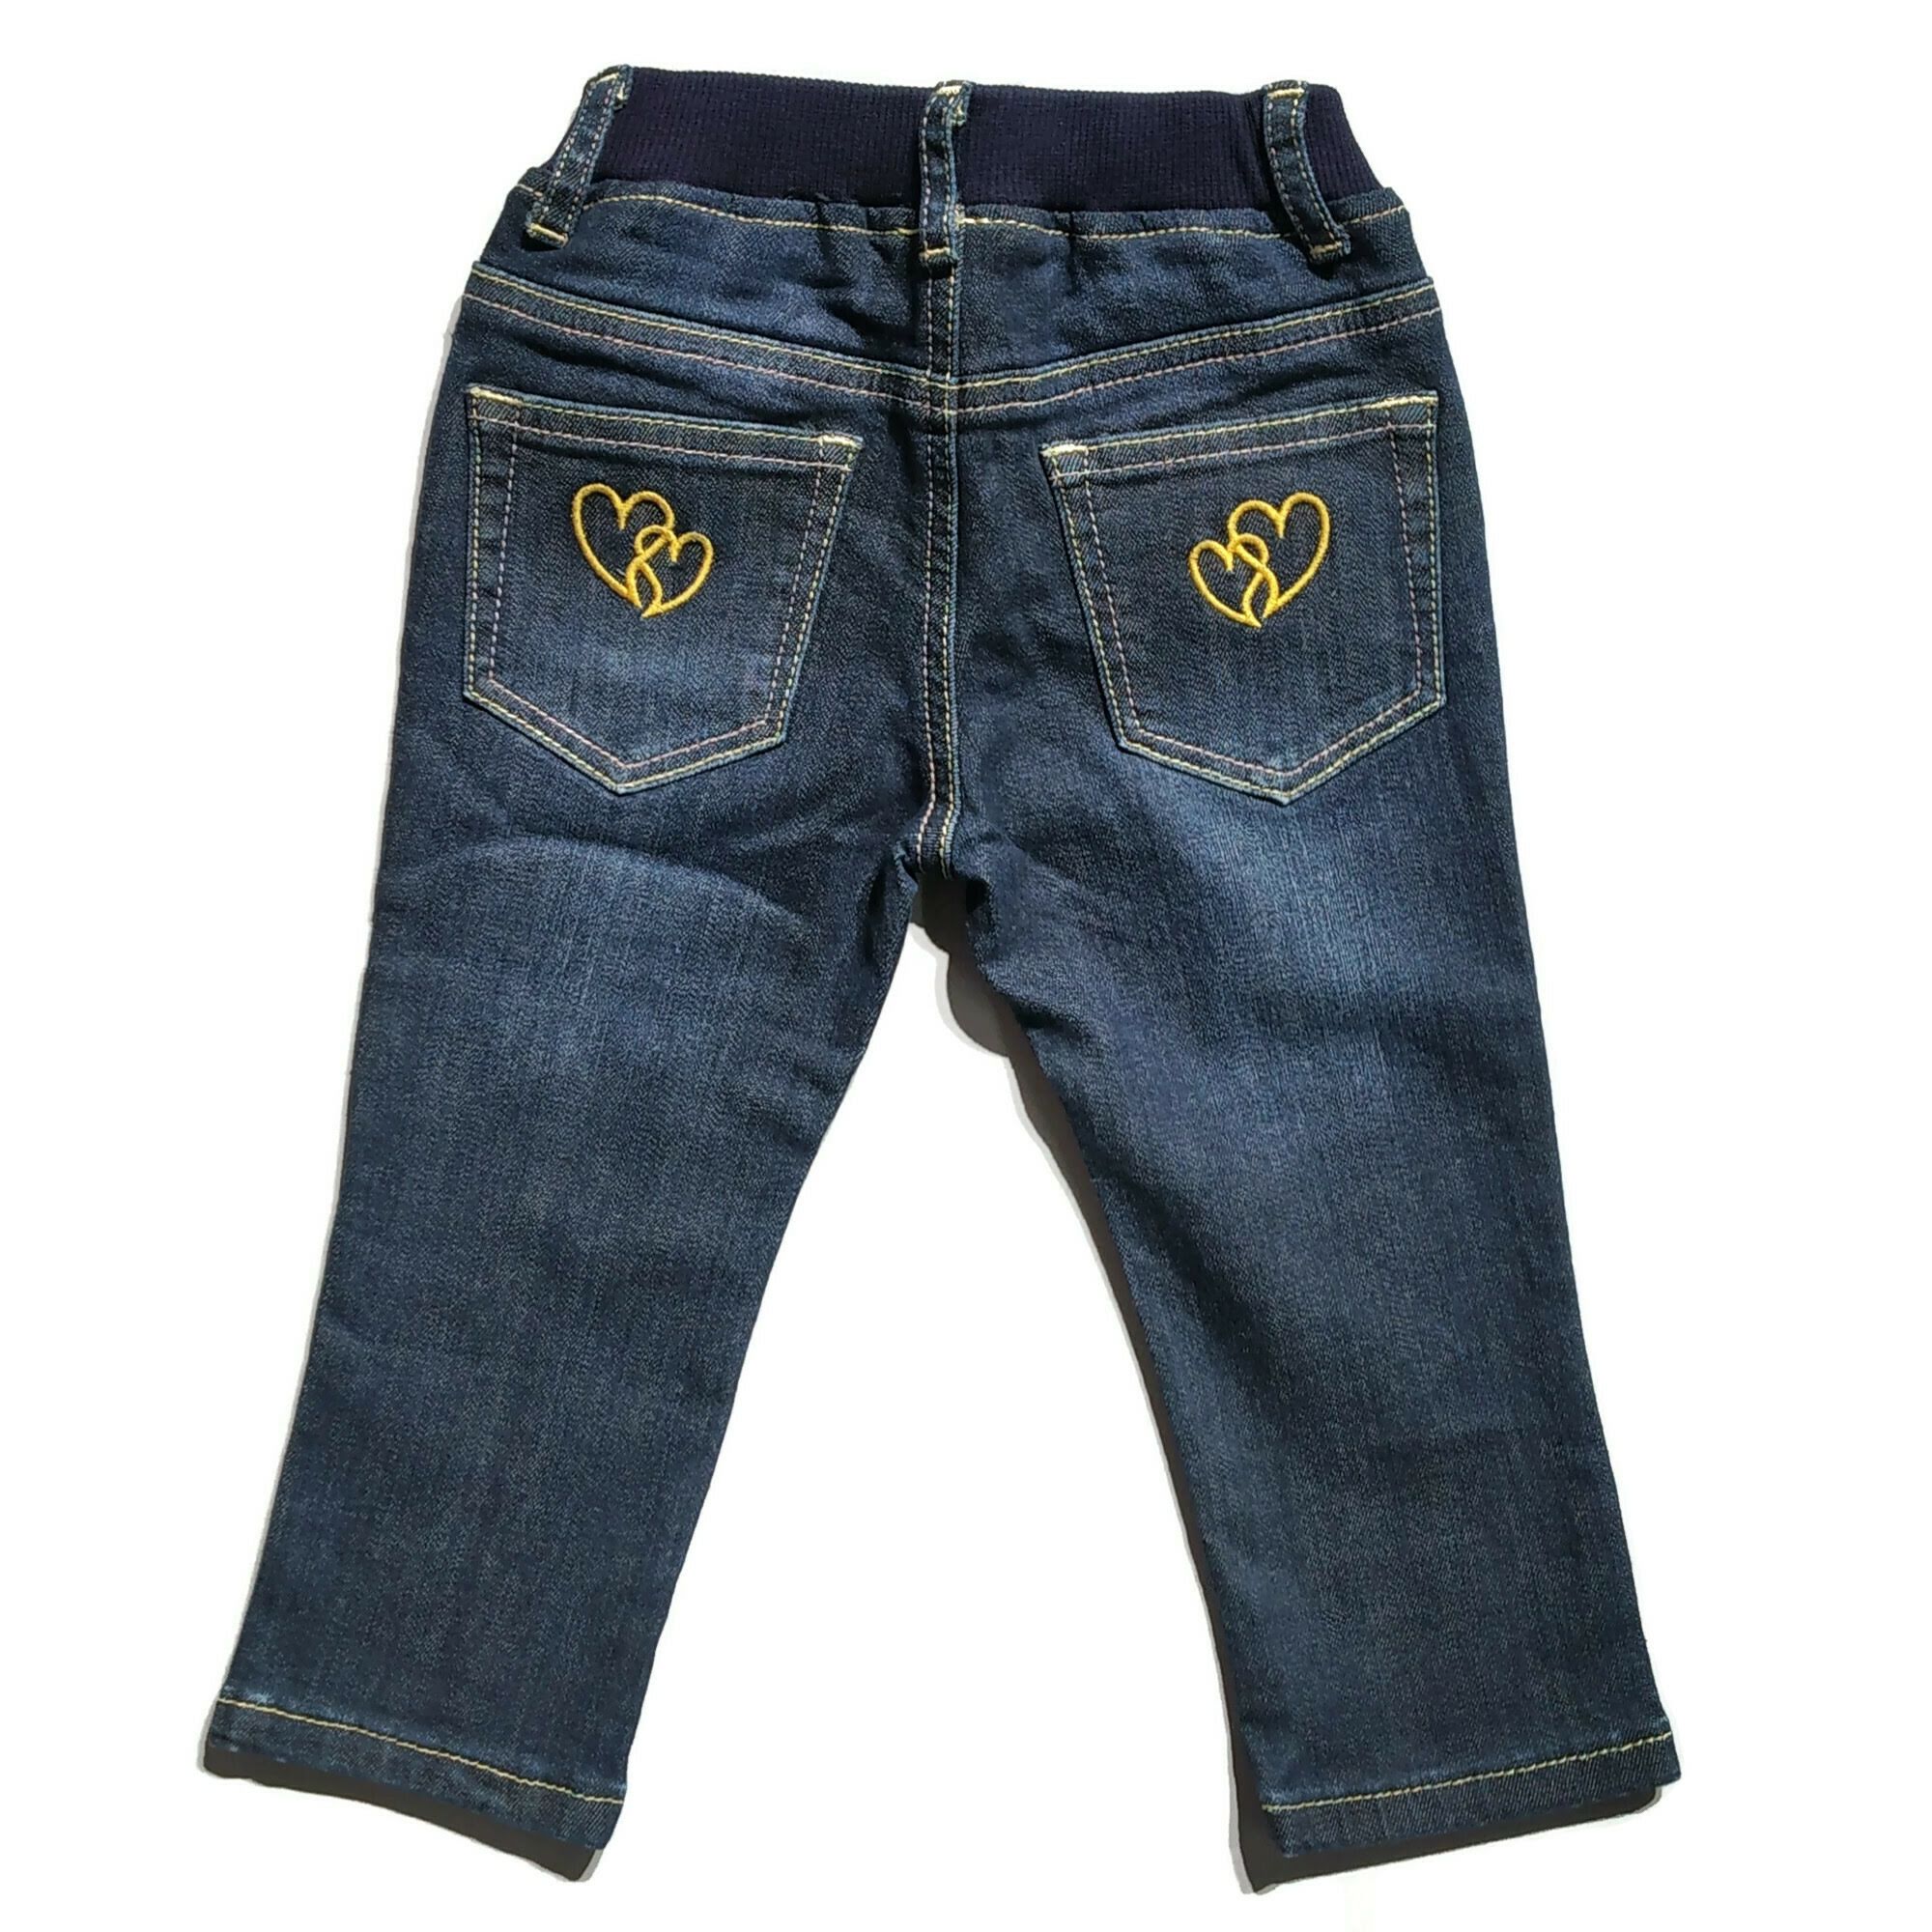 Buy R2G Girls Denim Joggers/Track Pants/Jeans Pants (LDoggy, Blue, 11-12  Years) at Amazon.in